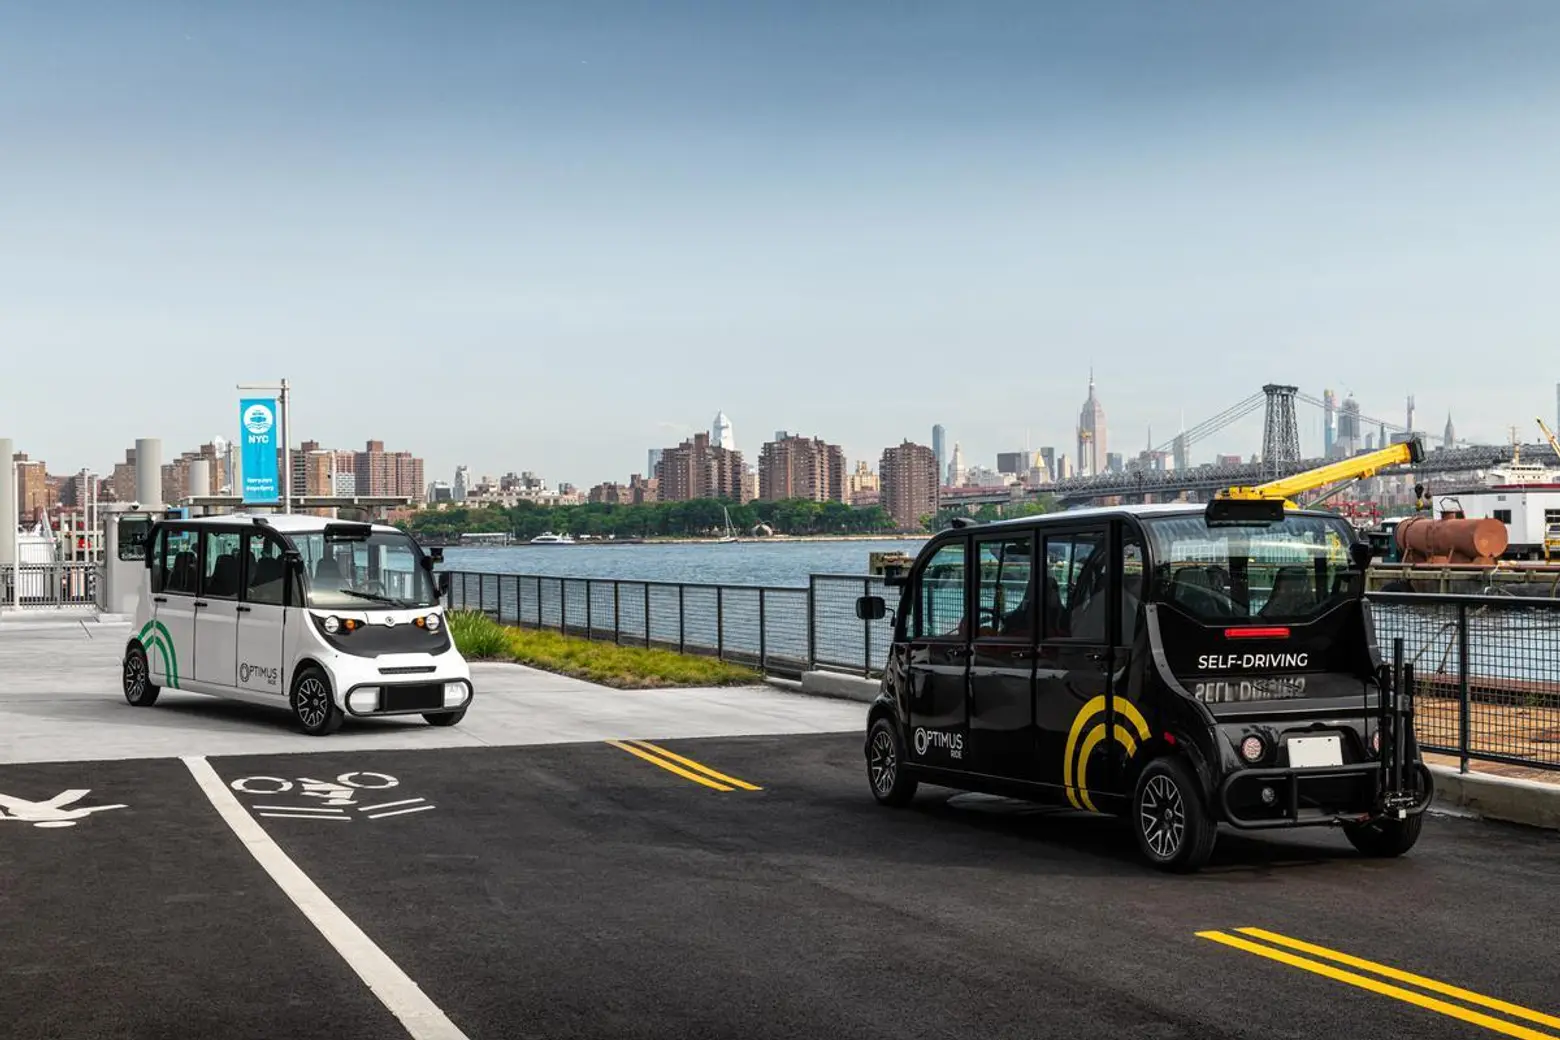 New York’s first fleet of self-driving cars launches at the Brooklyn Navy Yard